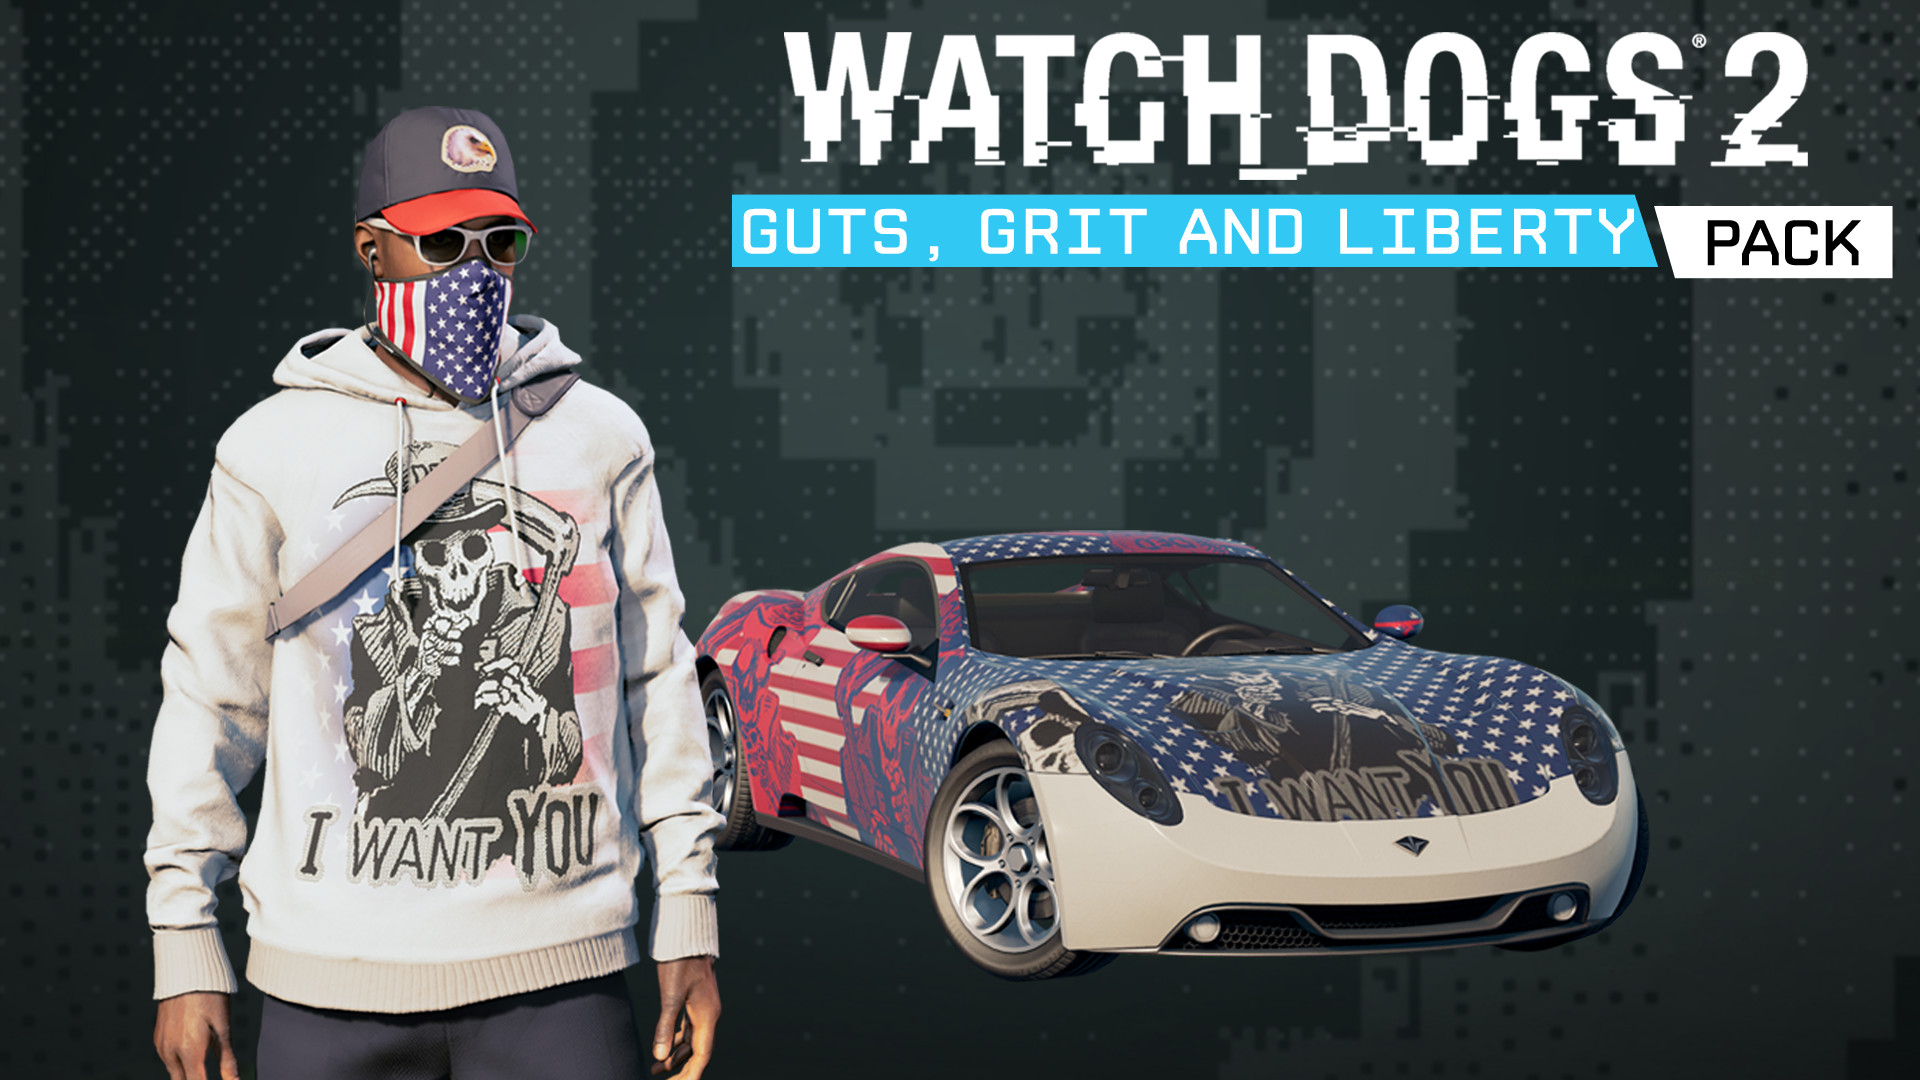 Watch_Dogs® 2 - Guts, Grit and Liberty Pack Featured Screenshot #1